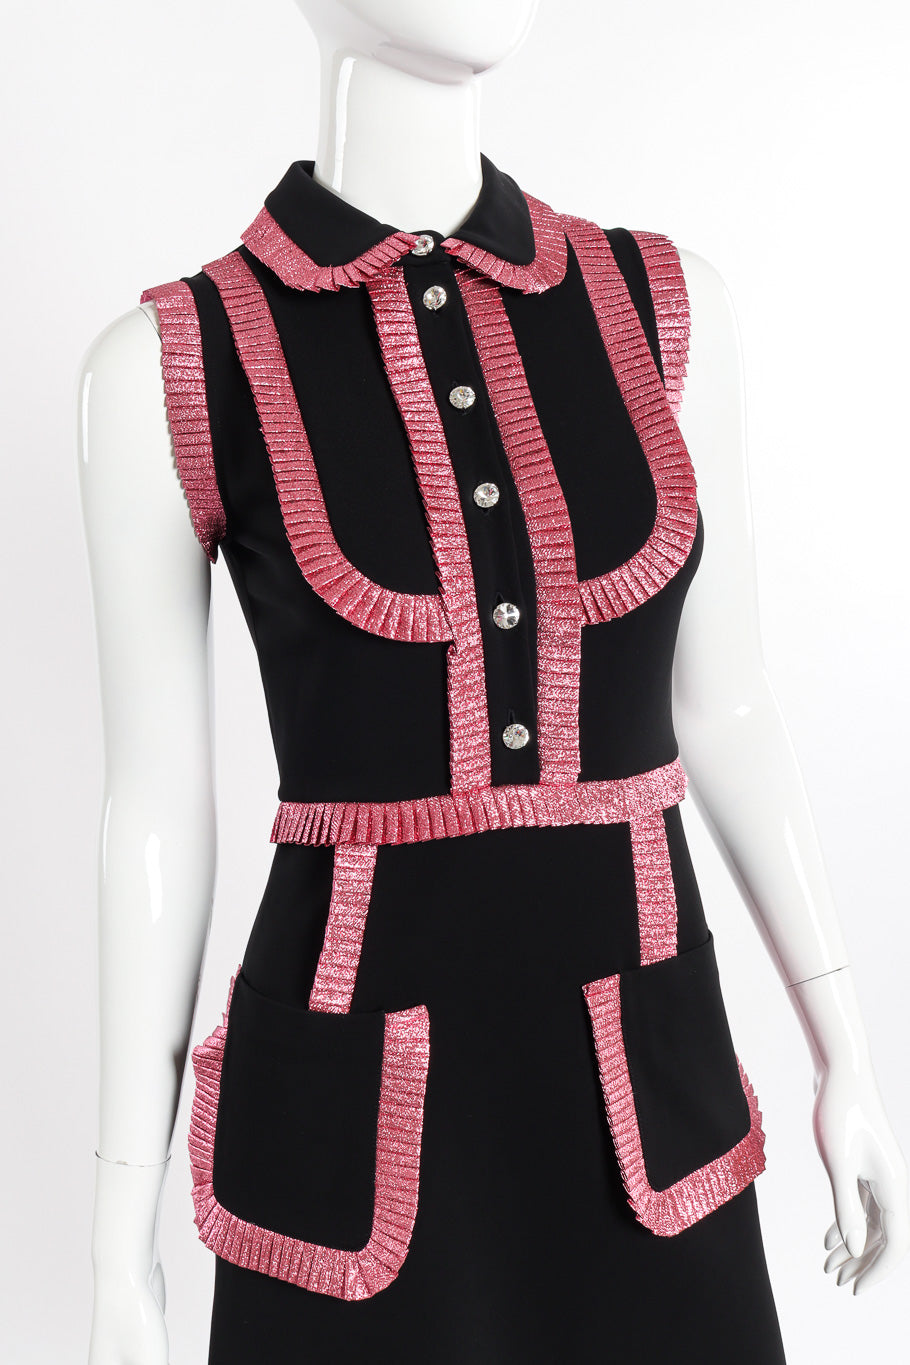 Gucci Pleated Trim Sleeveless Dress front view on mannequin closeup @recessla